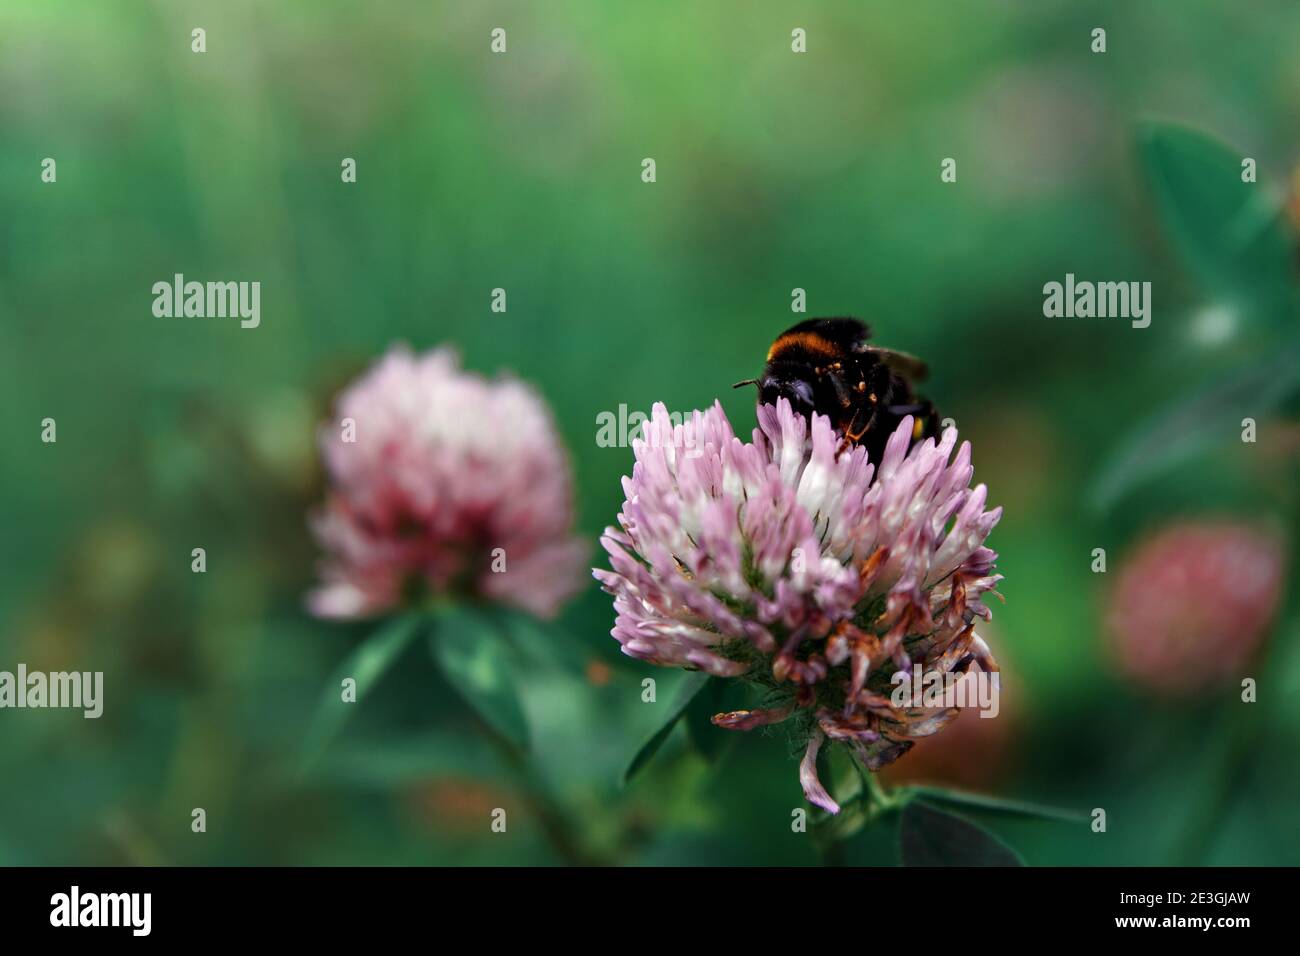 Shaggy bumblebee collects nectar from pink clover flower. Selective focus Stock Photo